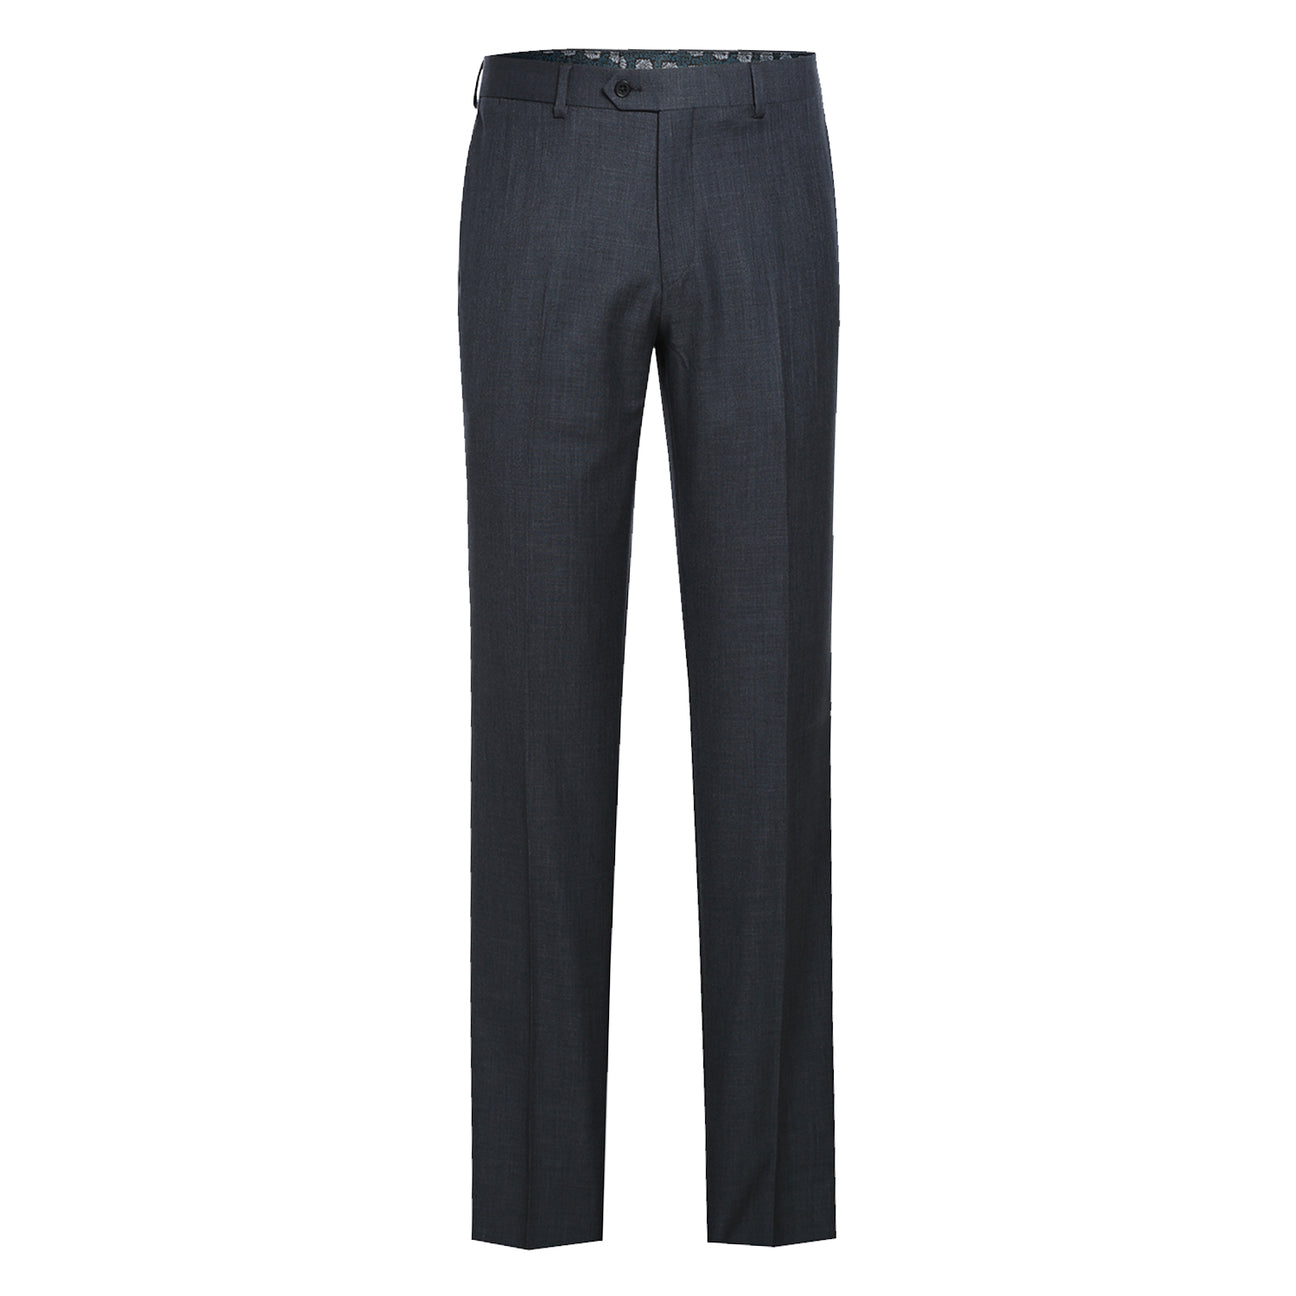 ENGLISH LAUNDRY Solid Charcoal Notch Suit 72-02-095